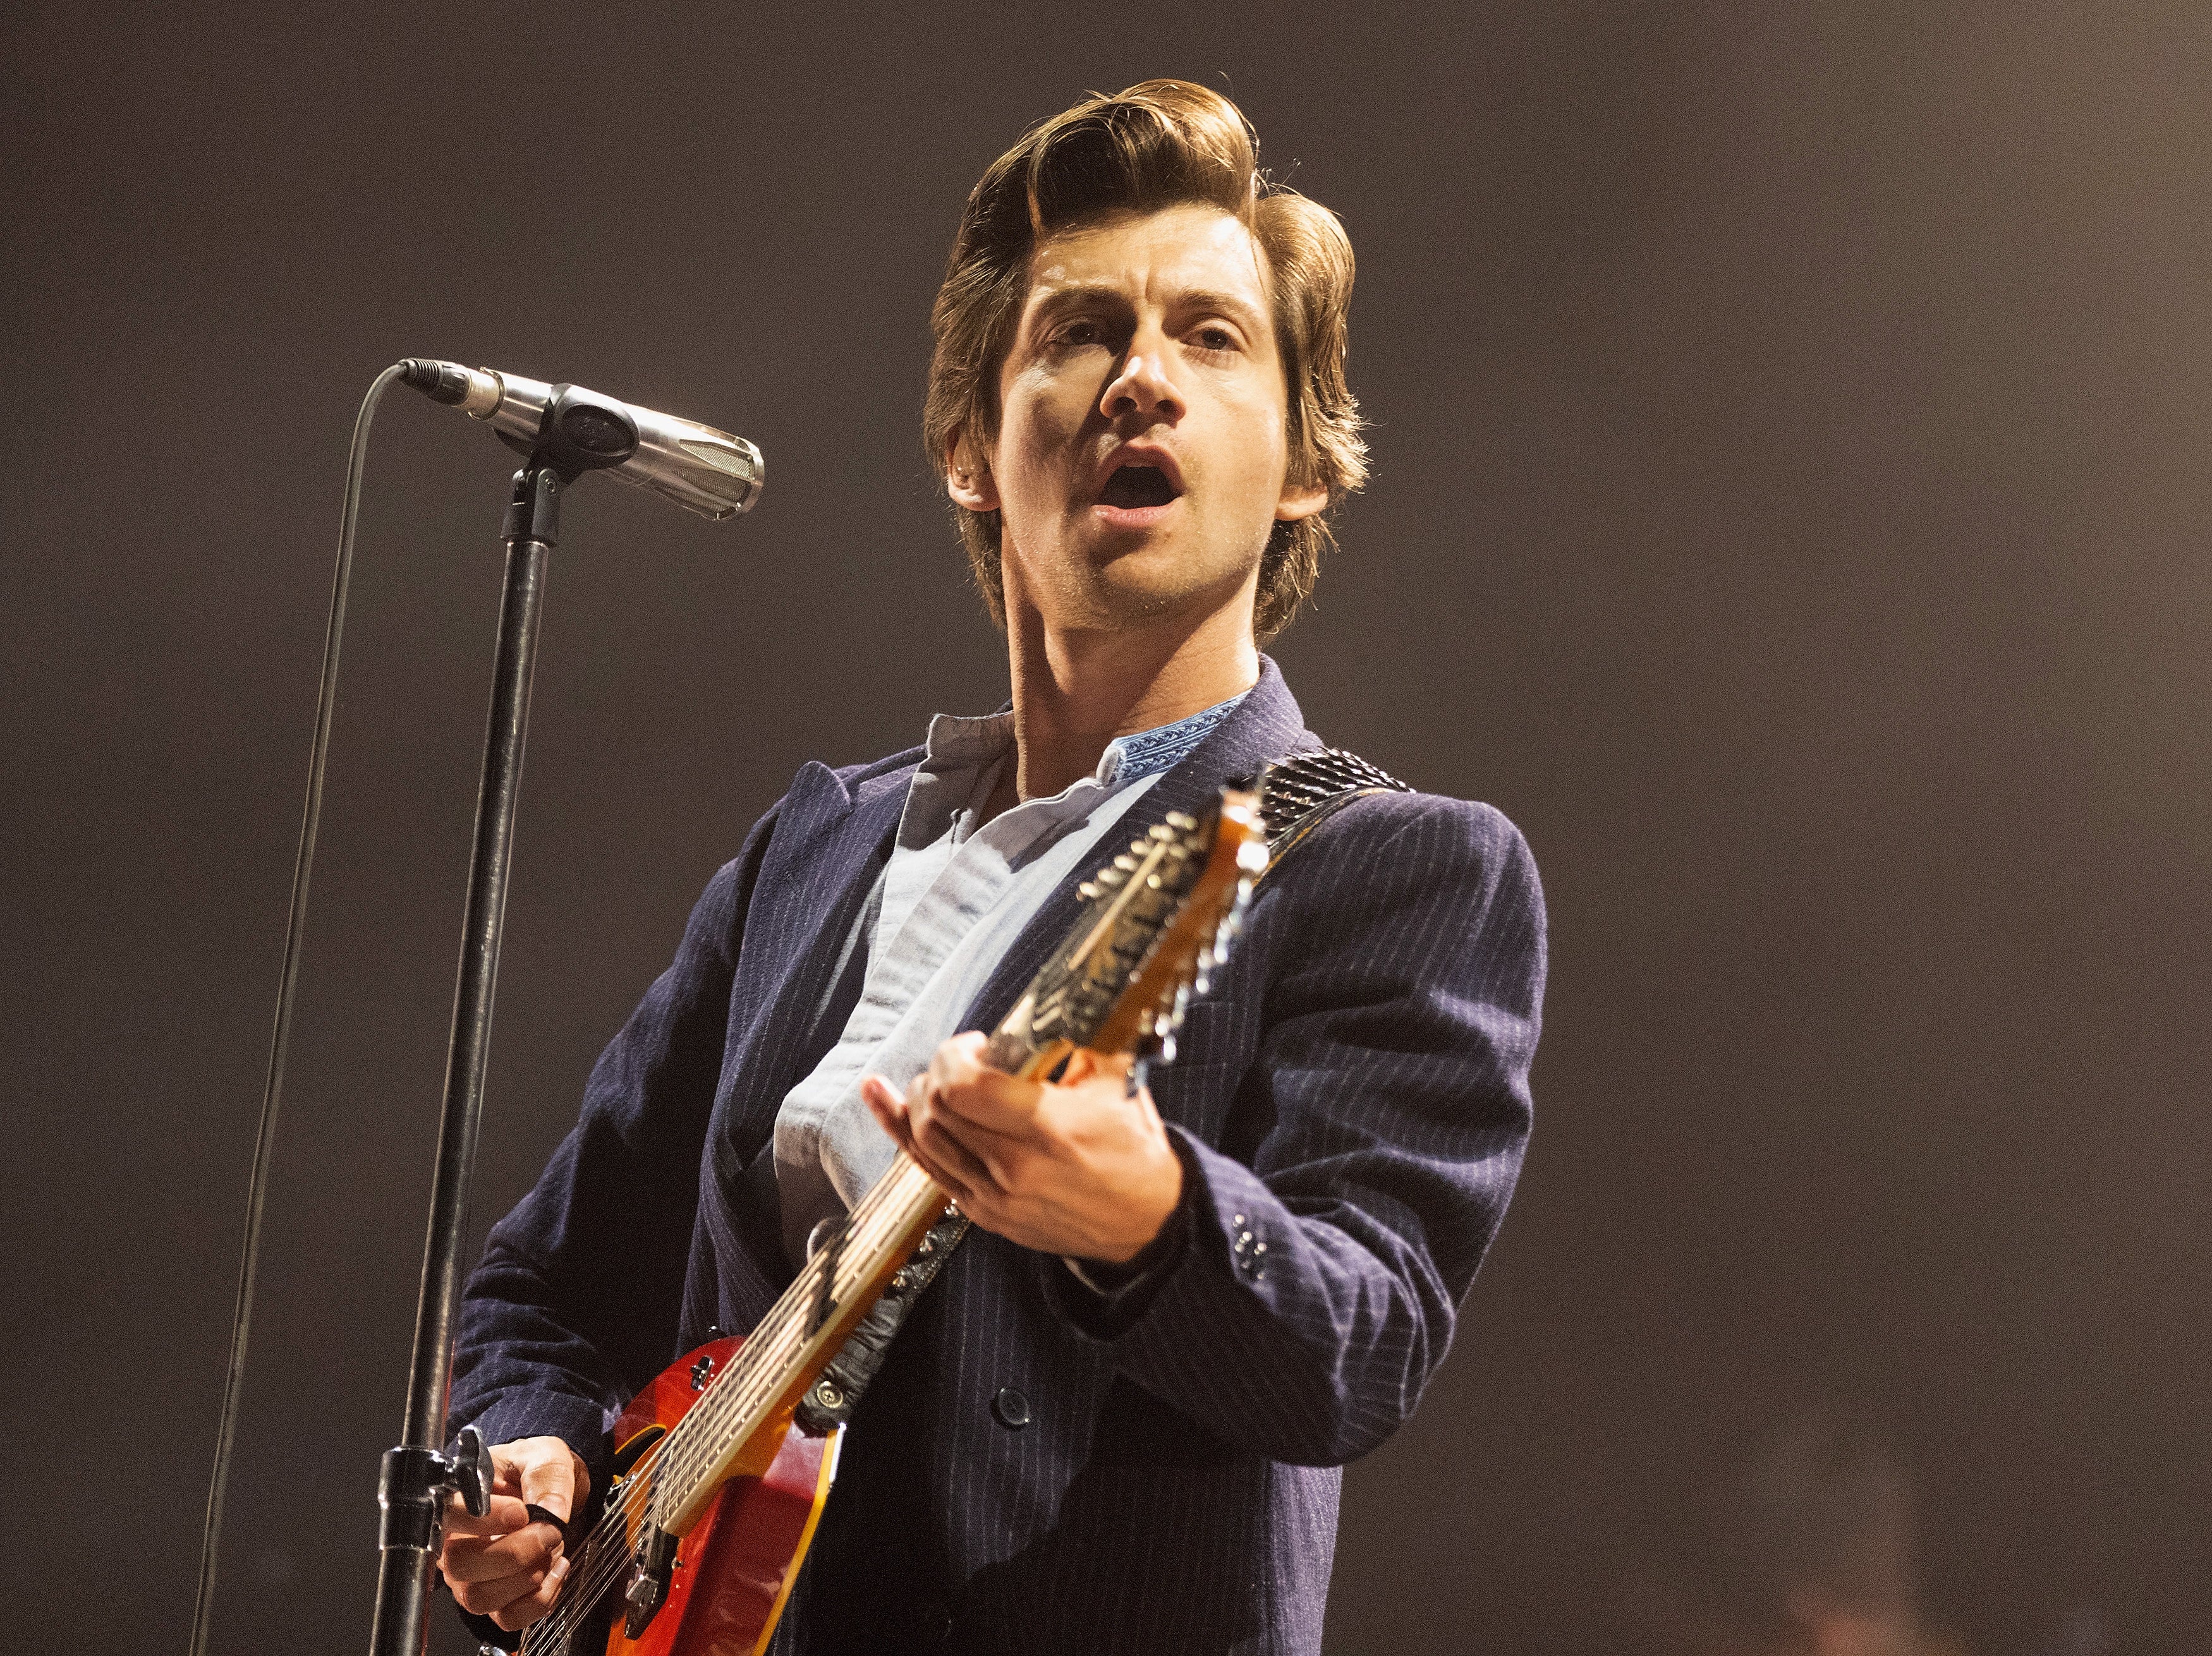 Alex Turner of Arctic Monkeys performs at Reading Festival